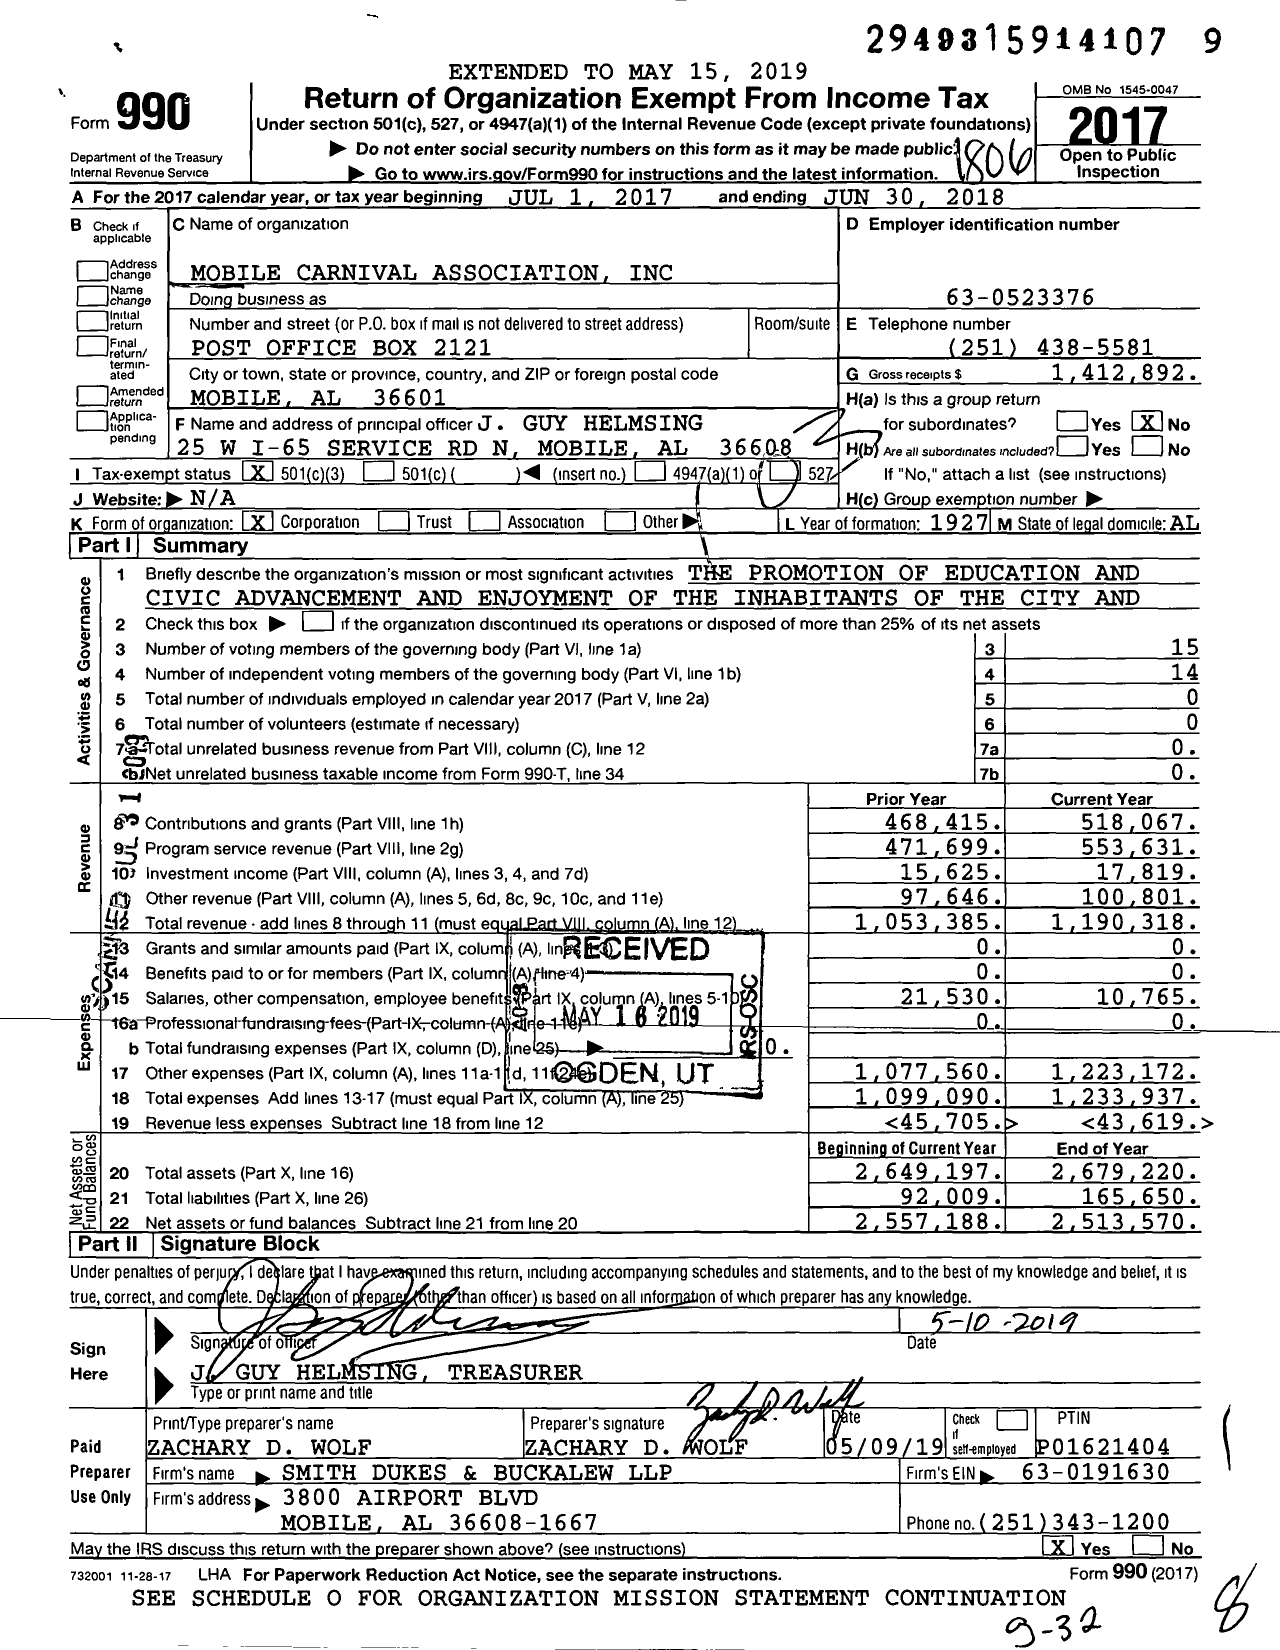 Image of first page of 2017 Form 990 for Mobile Carnival Association